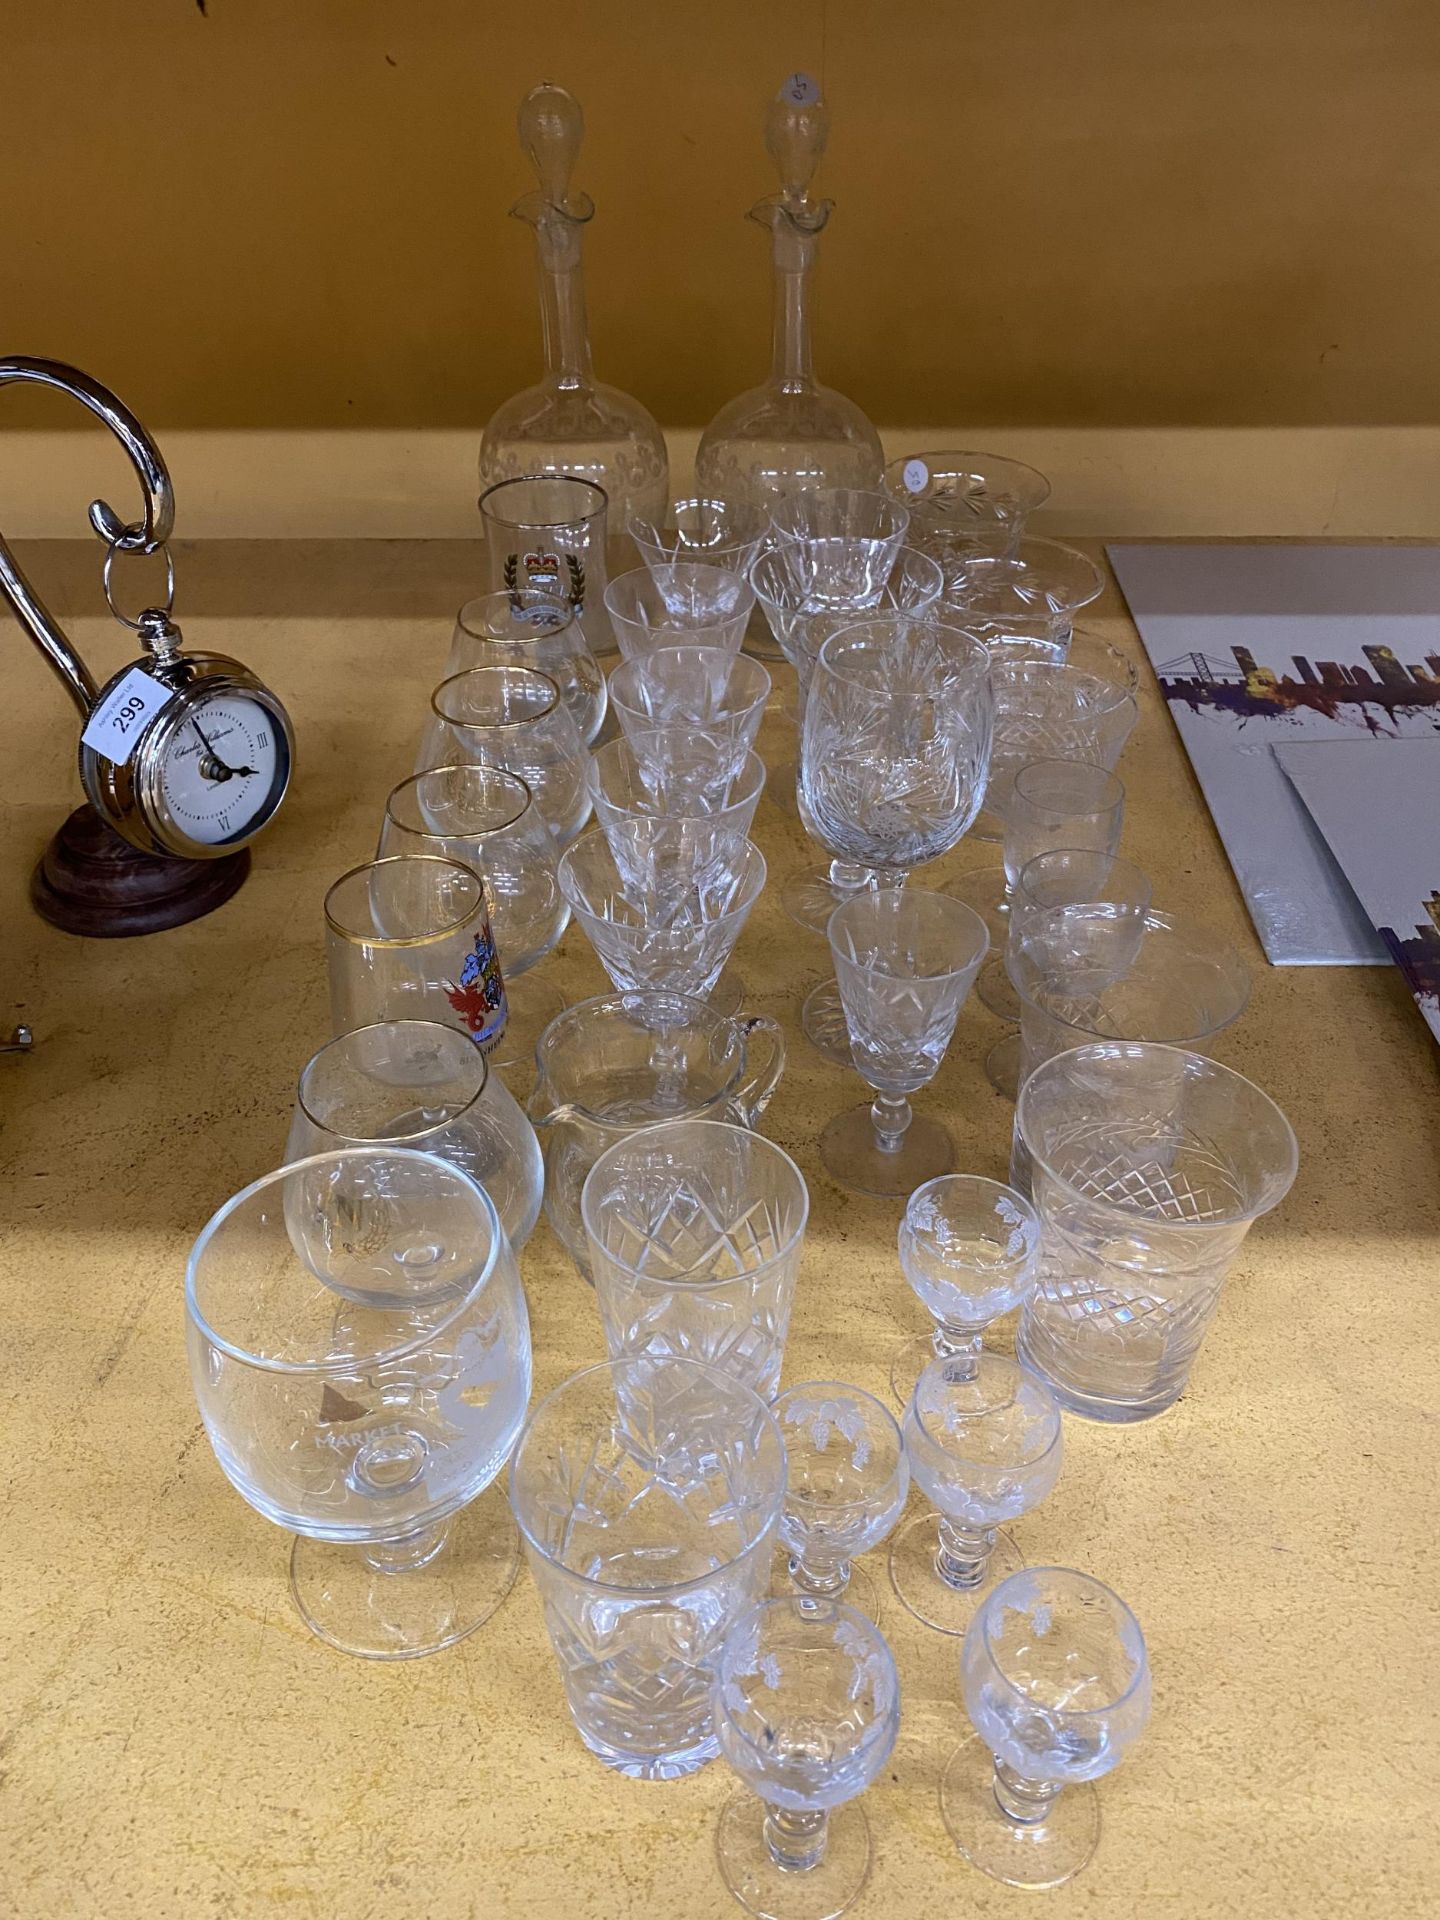 A LARGE QUANTITY OF GLASSWARE TO INCLUDE CUT GLASS - ETCHED DECANTERS, DESSERT BOWLS, LICQUER